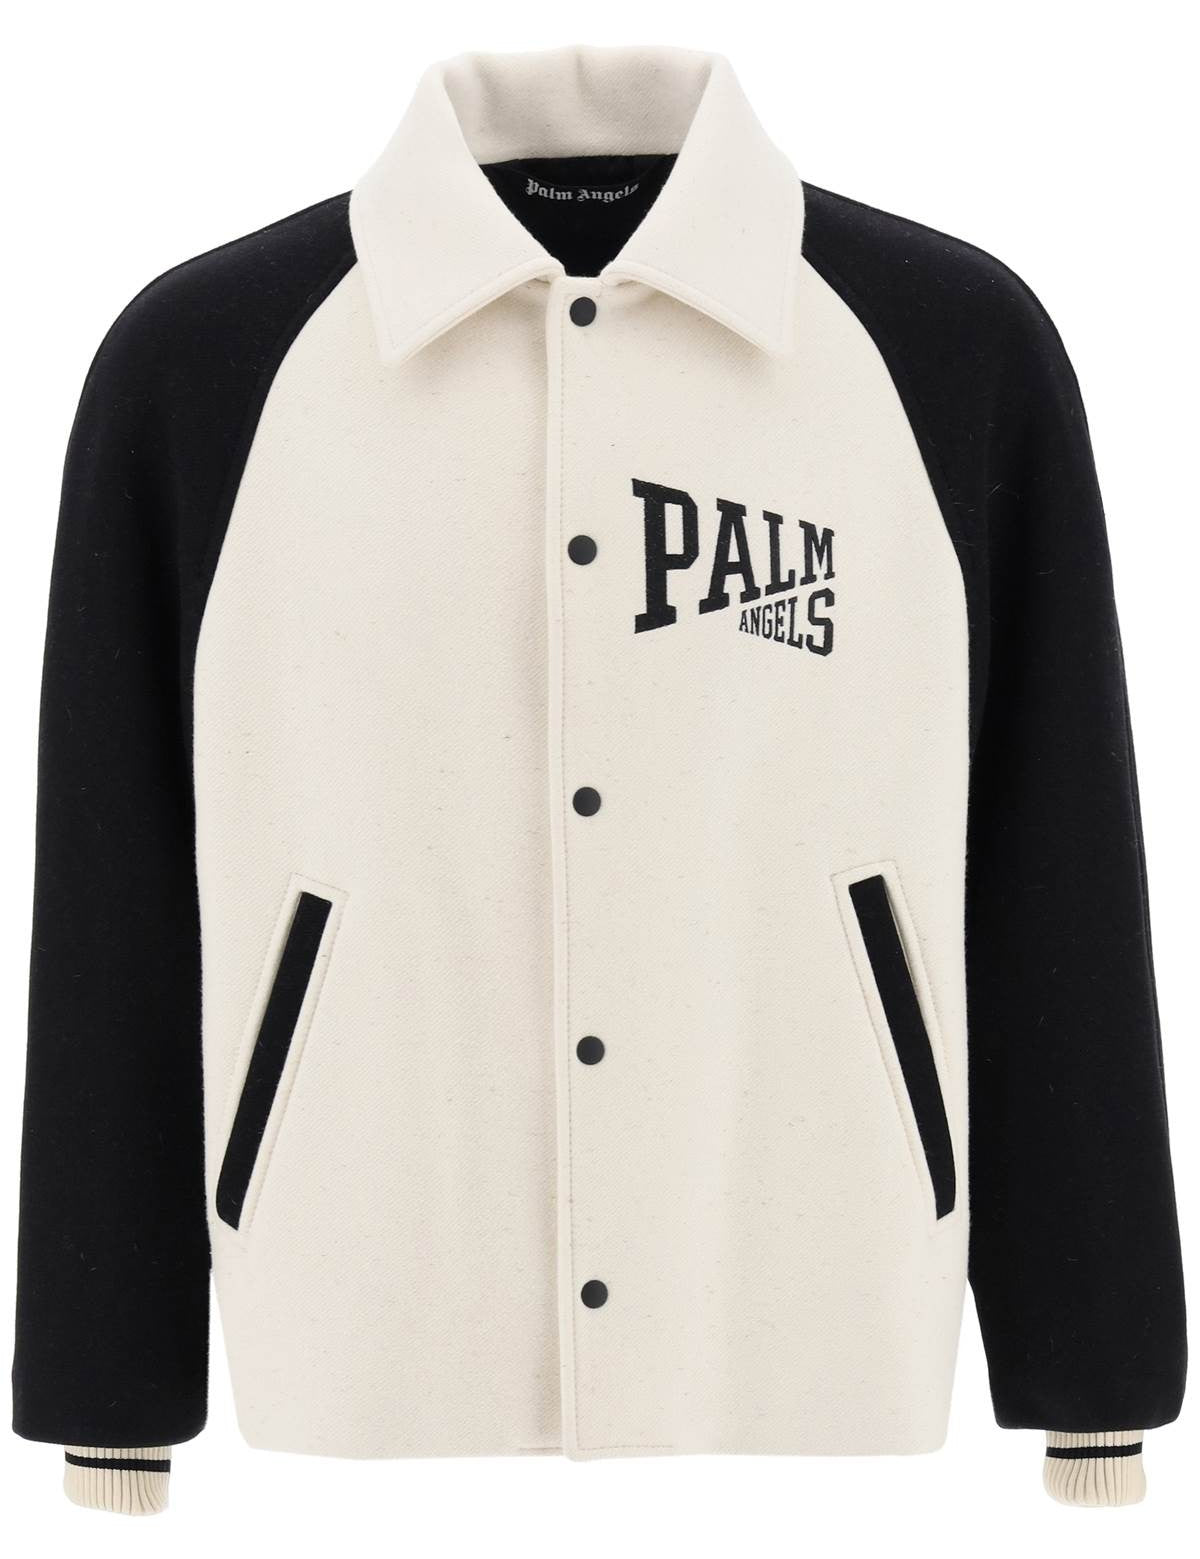 palm-angels-wool-varsity-jacket-with-embroidery.jpg